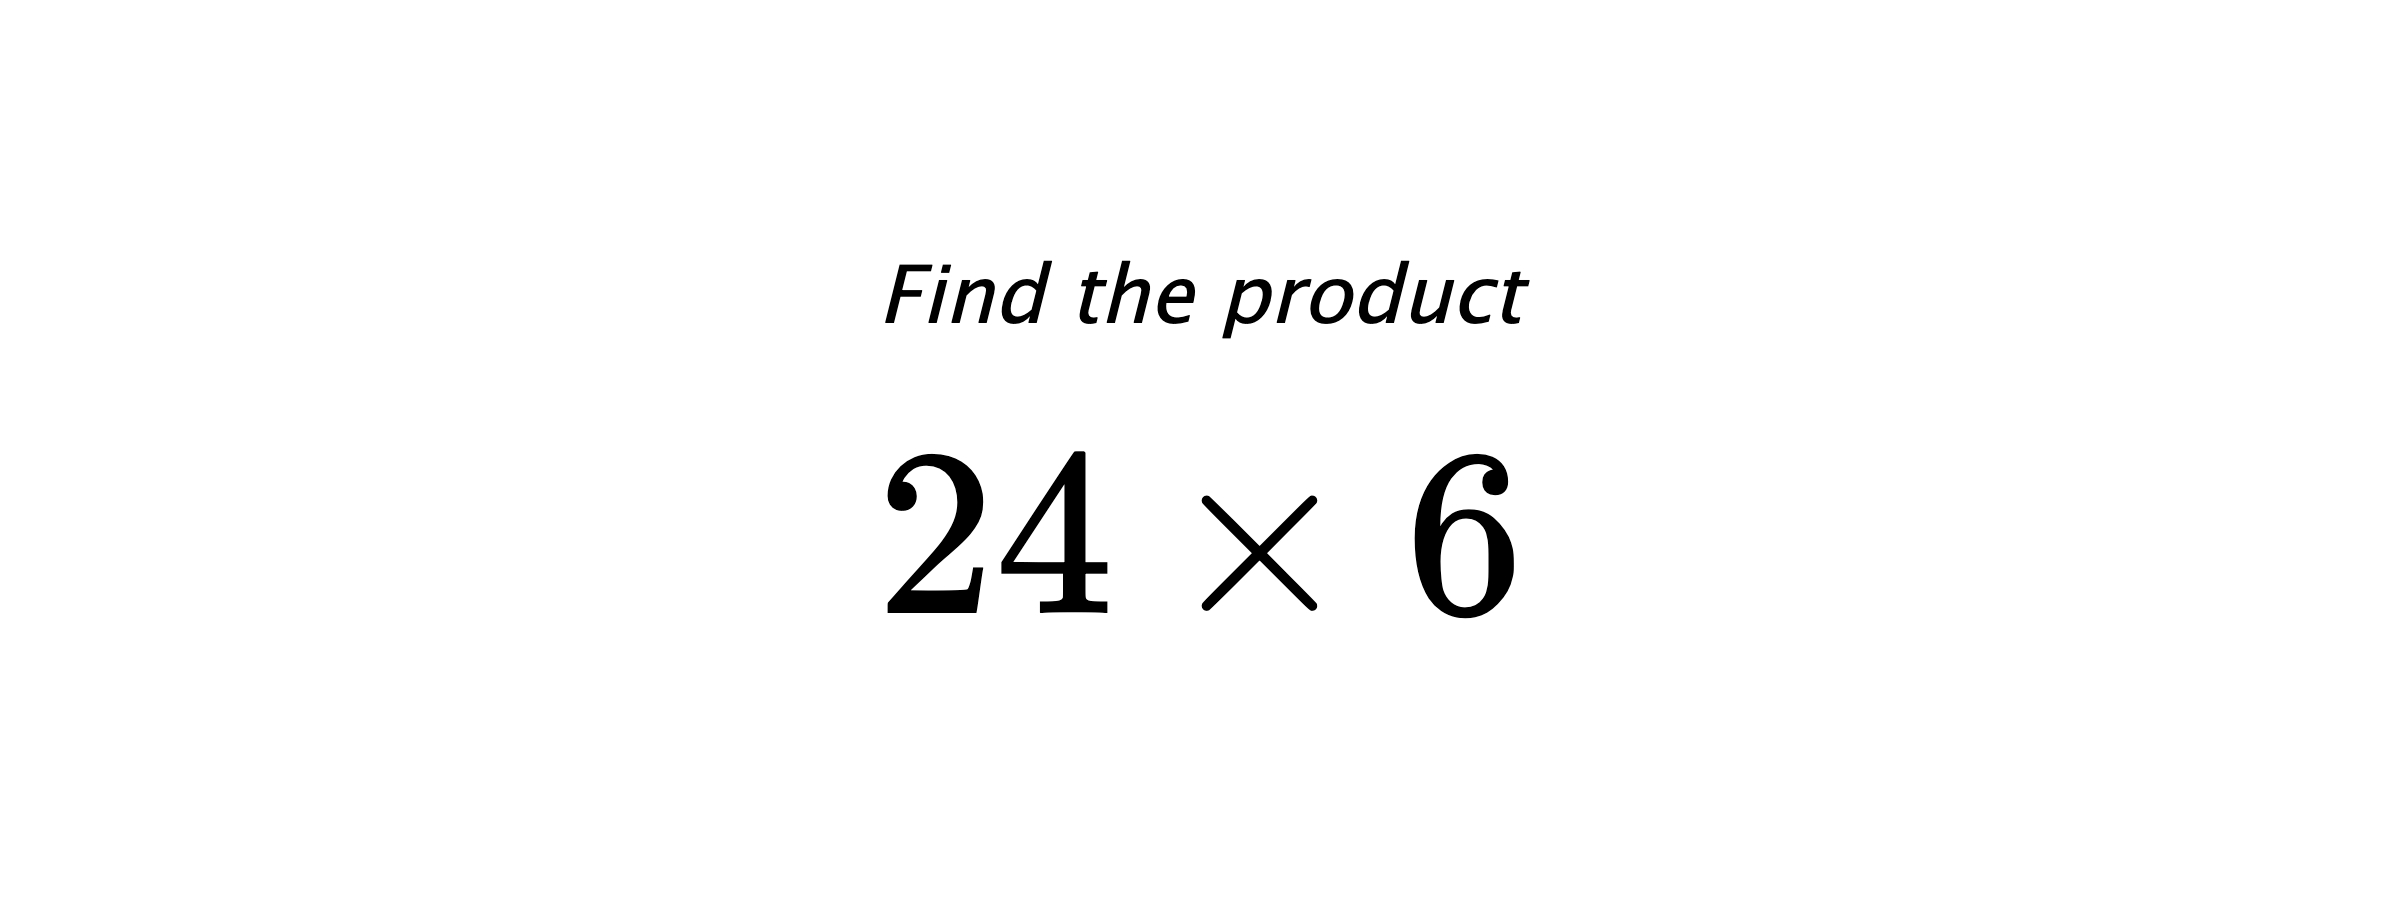 Find the product $ 24 \times 6 $